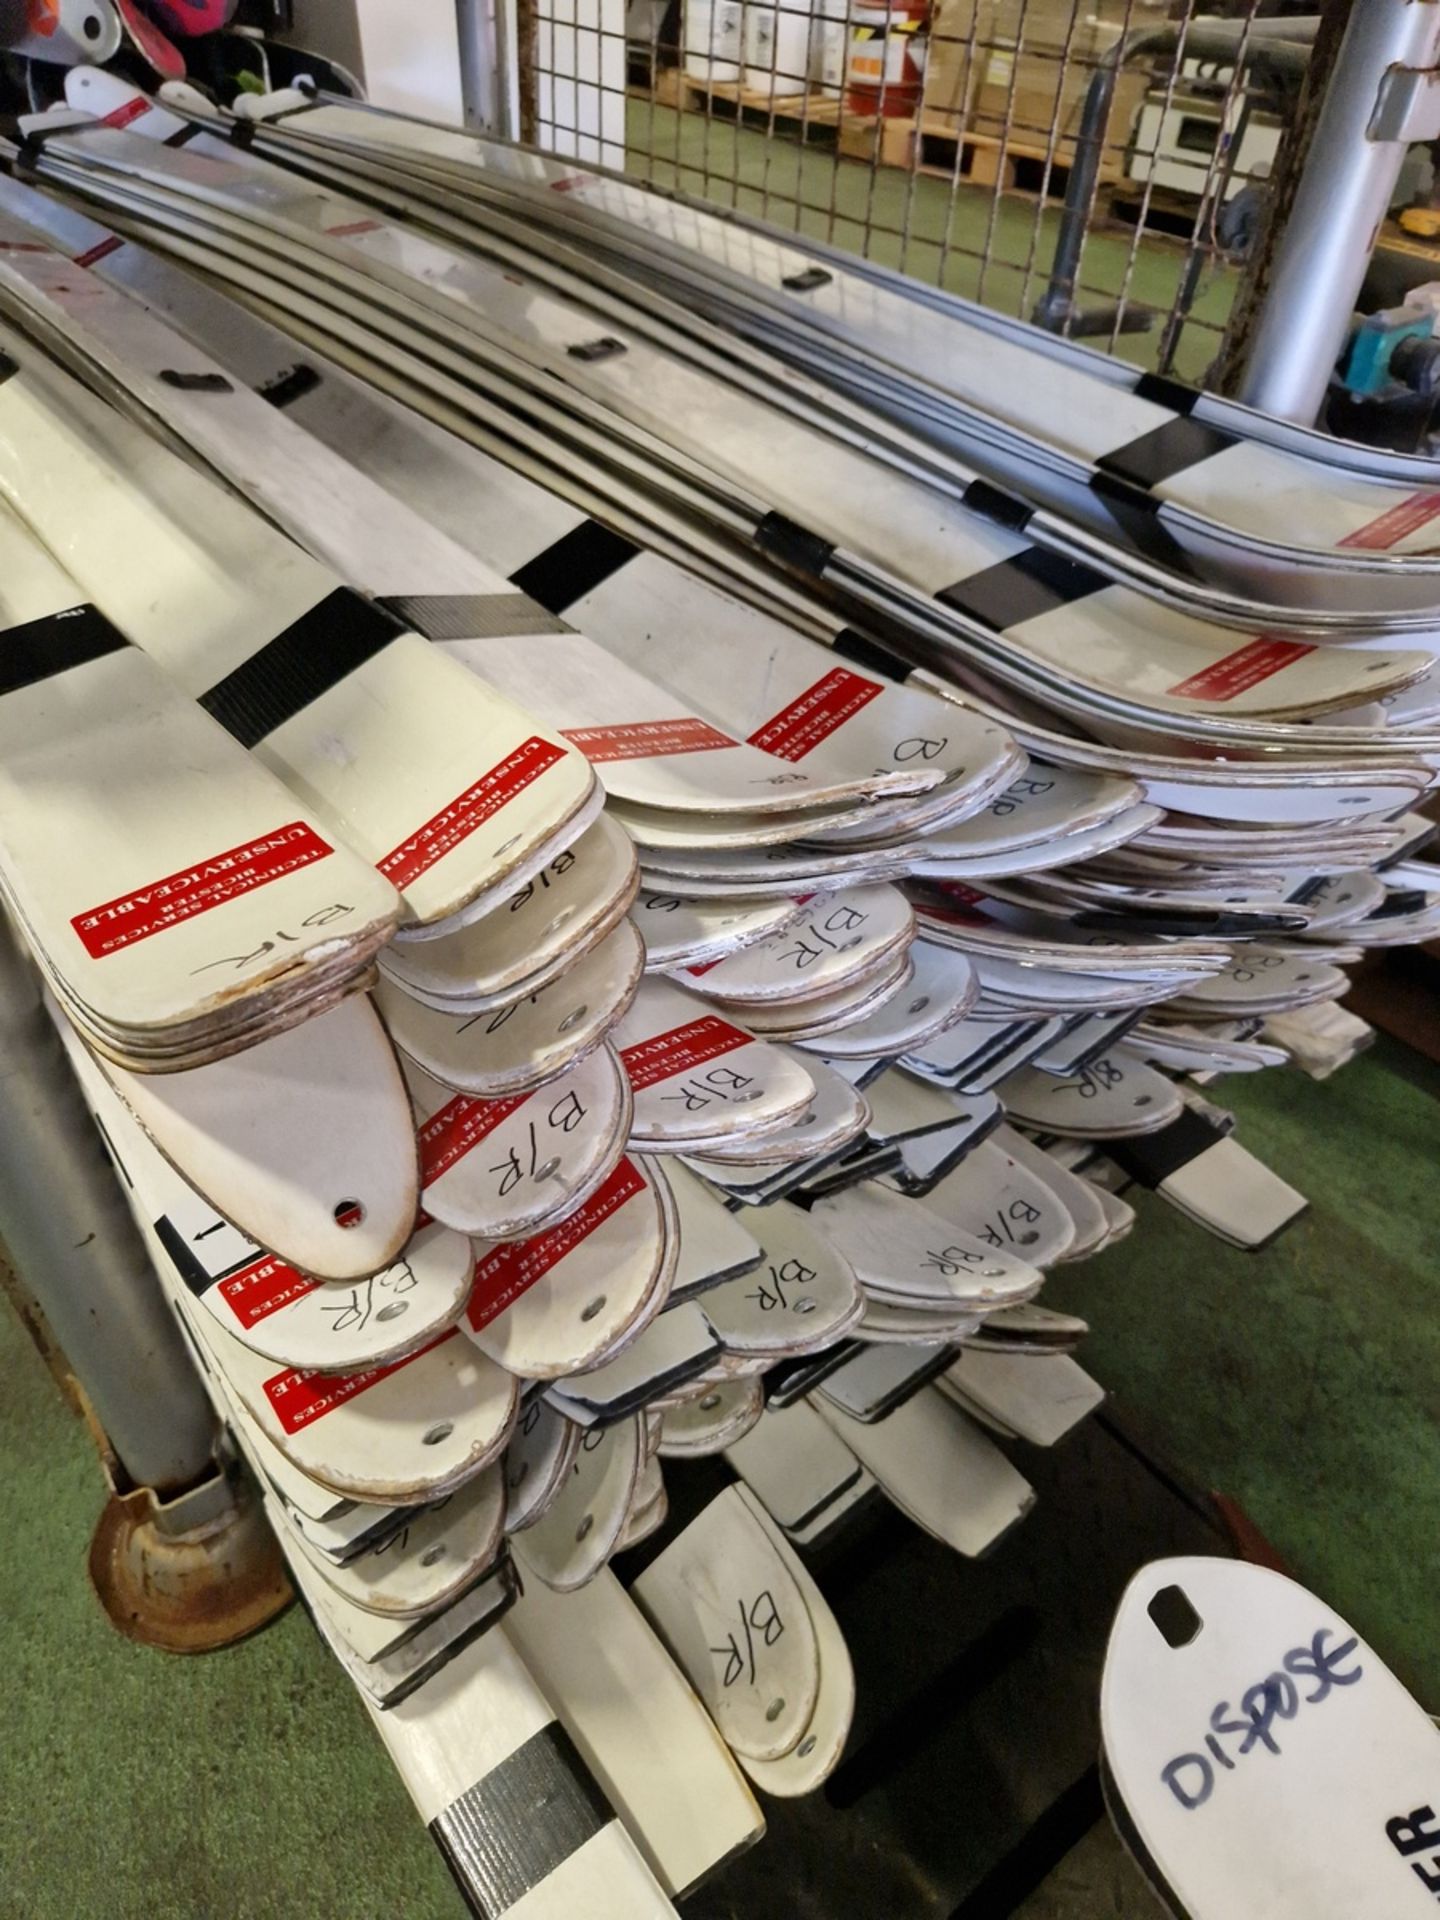 White nordic combat skis - no clamps - approx. 145 pairs, Fischer skis - no clamps - 20 pairs - Image 8 of 9